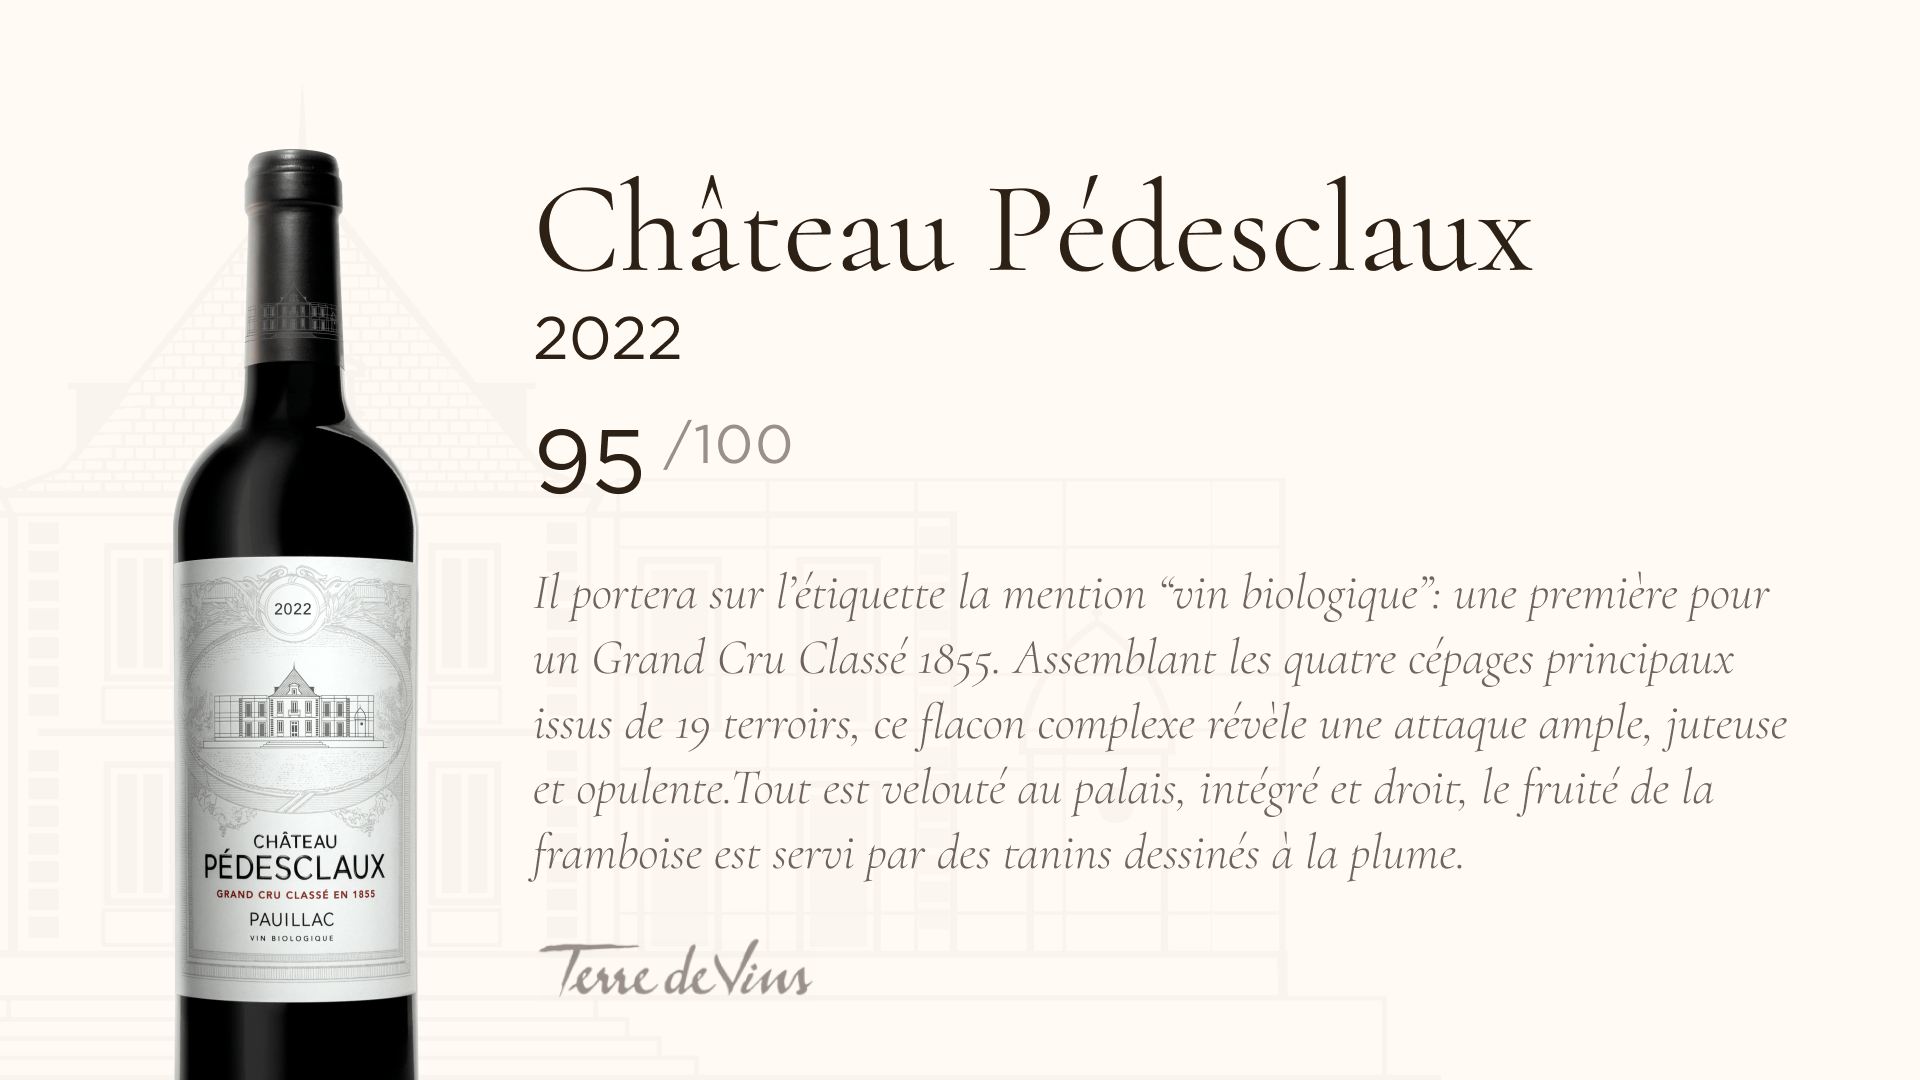 2022, the first 100% gravity-flow, organically-certified vintage now available - Chateau Pedesclaux